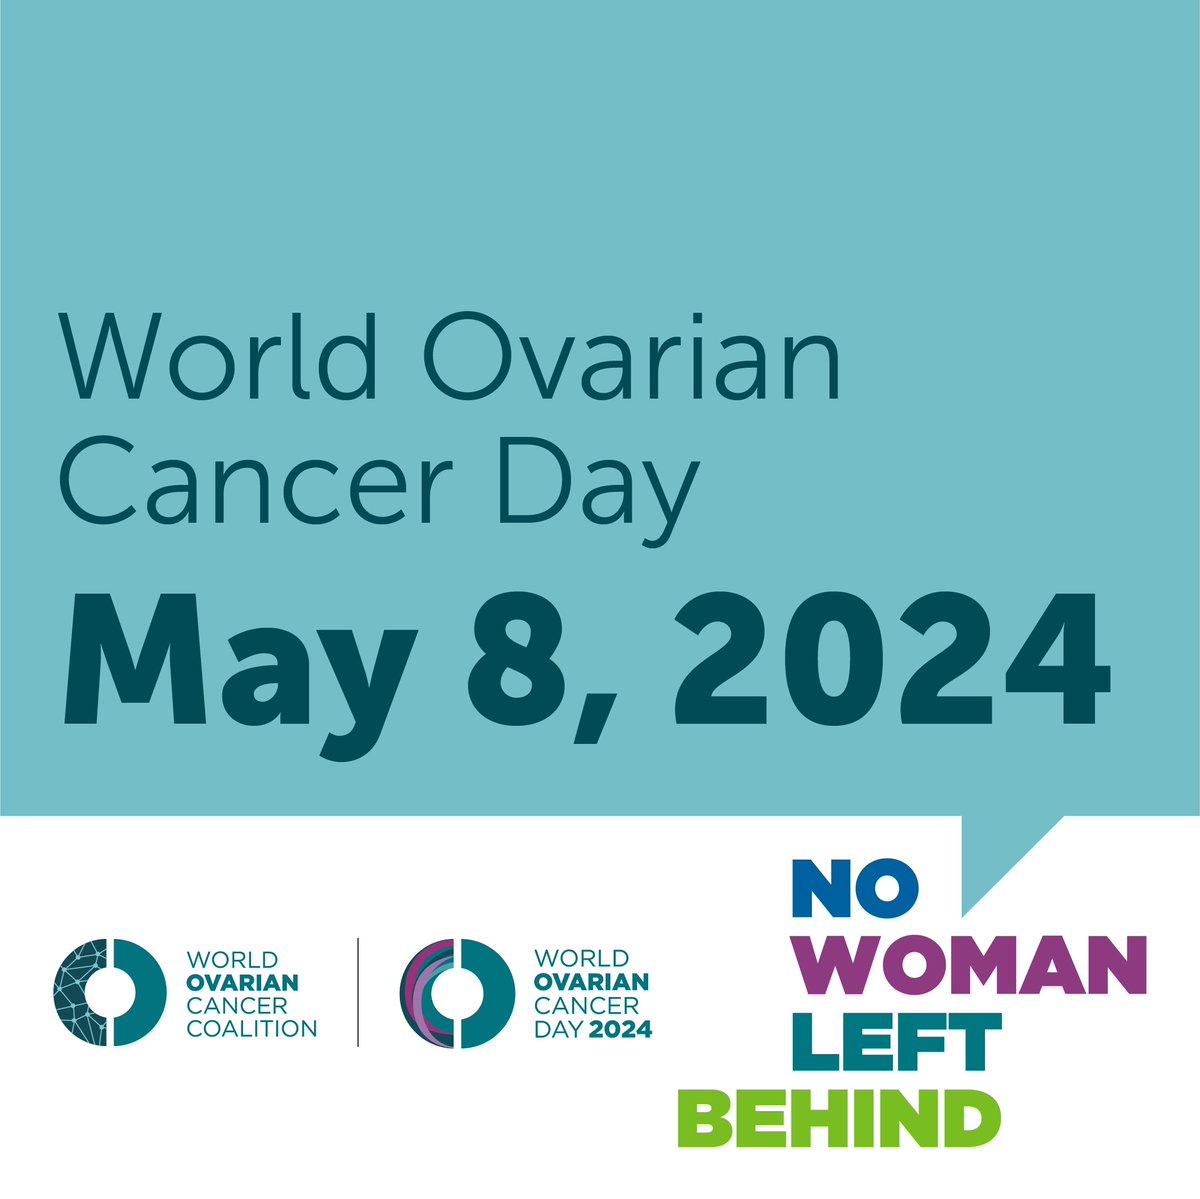 Established in 2013 by a group of leaders from ovarian cancer advocacy organizations around the world, May 8 – World Ovarian Cancer Day, is the one day of the year we globally raise our voices in solidarity in the fight against ovarian cancer.